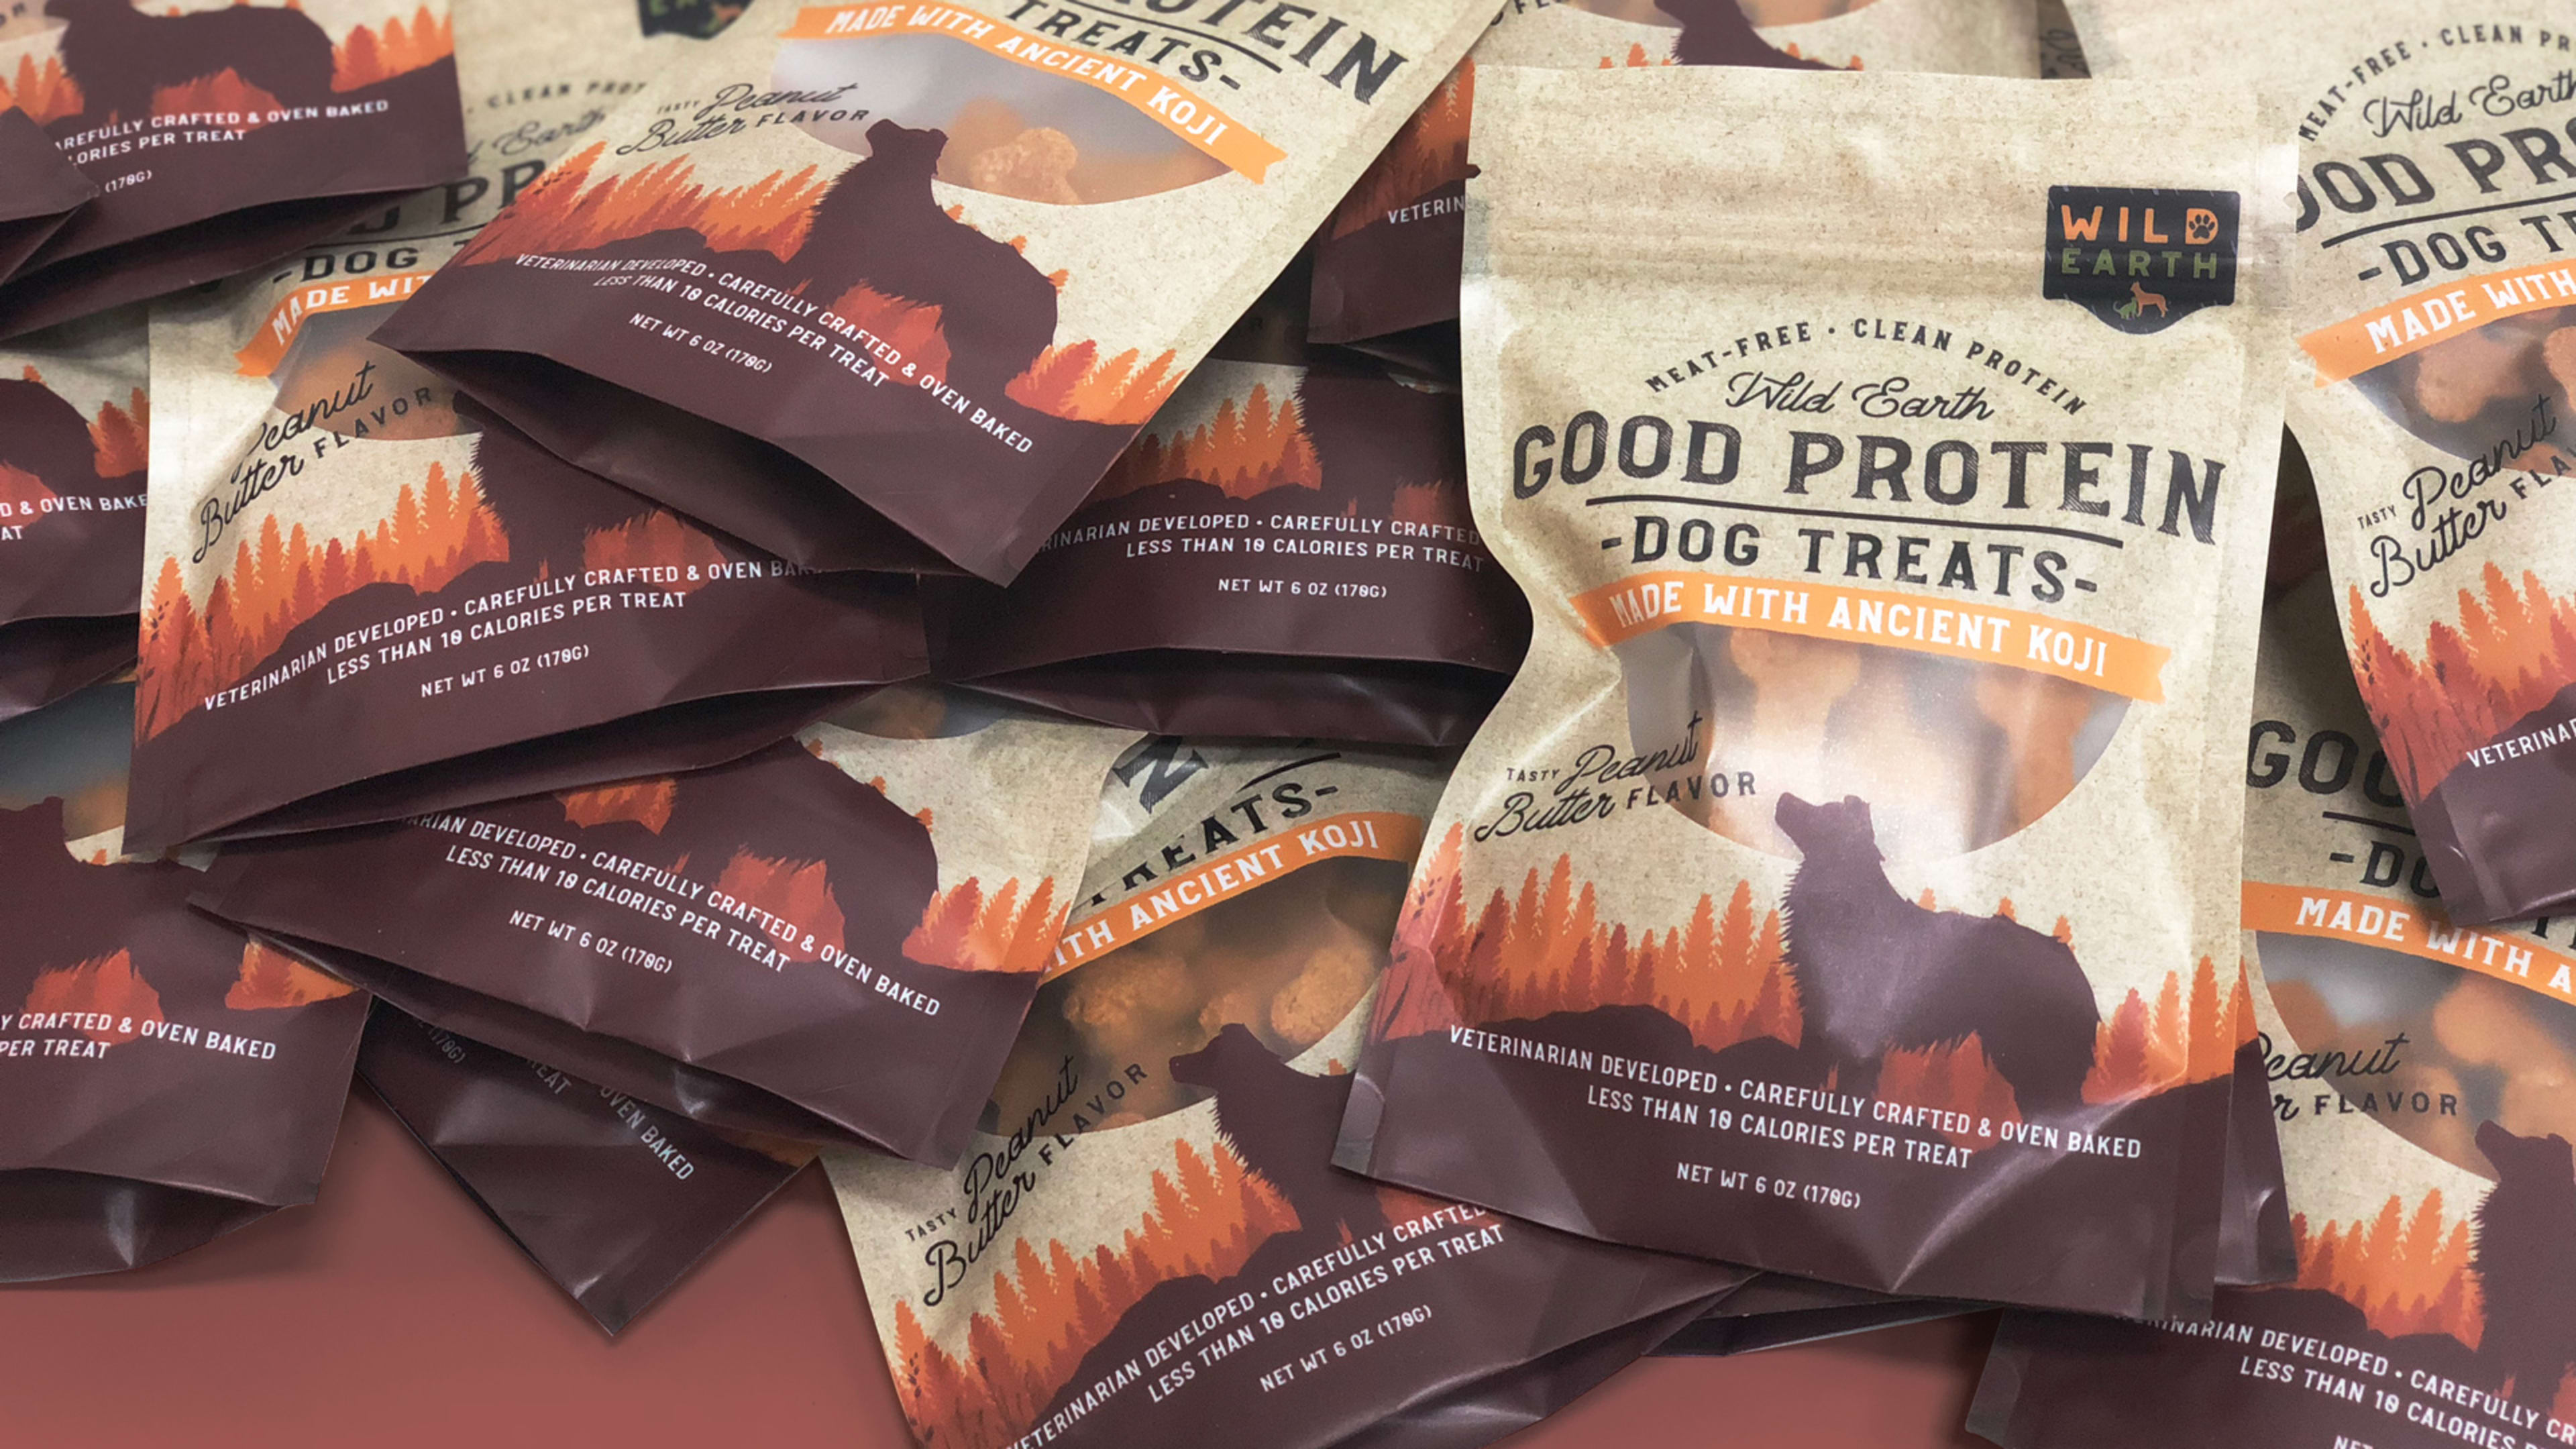 This biotech startup is growing protein-rich vegan pet food in a lab